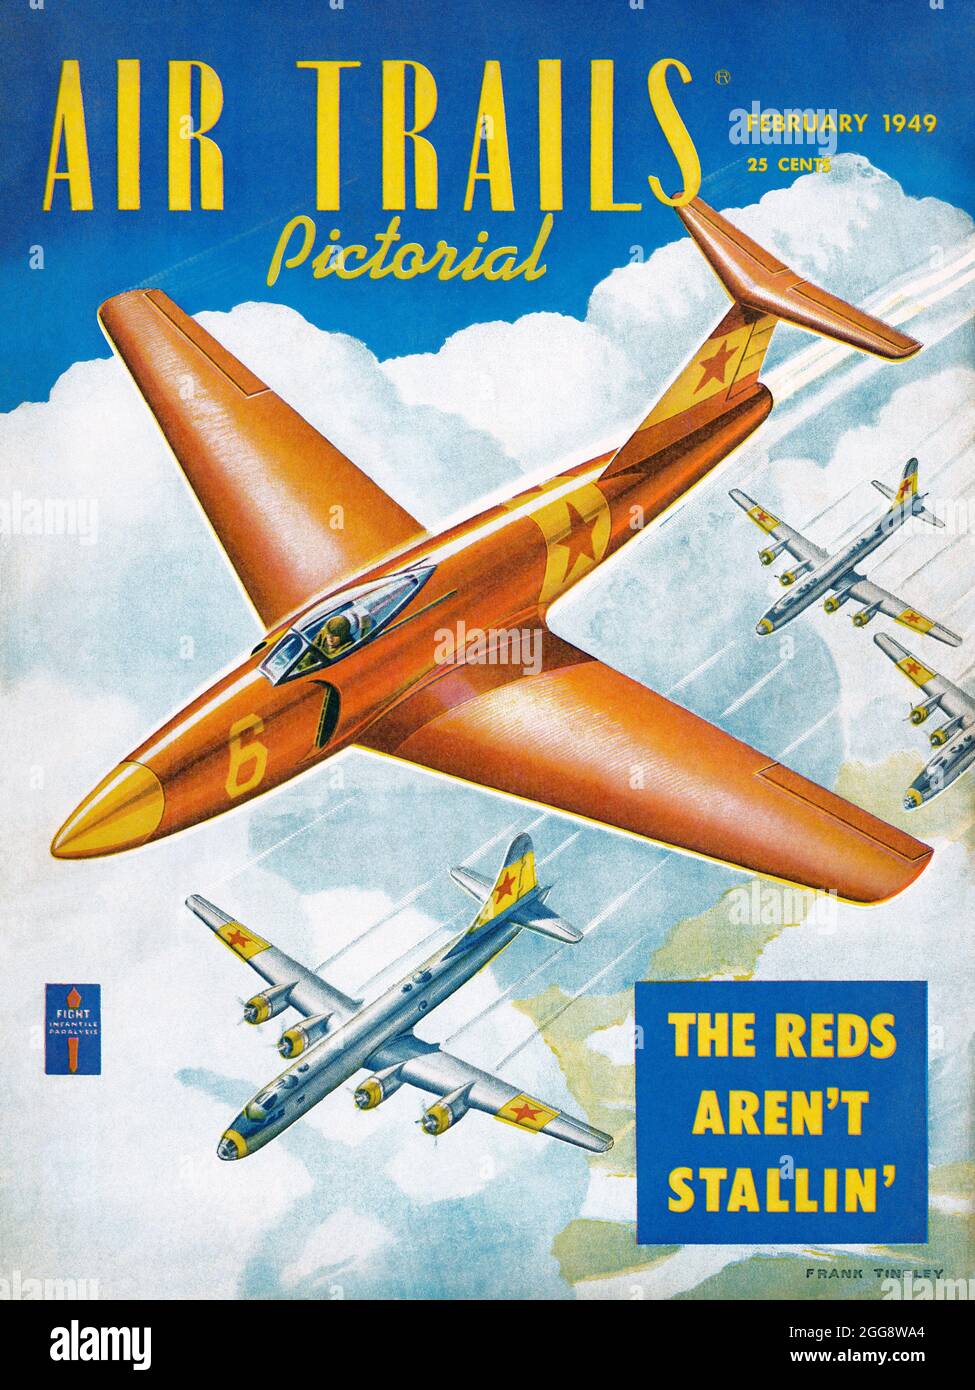 Vintage magazine front cover of Air Trails for February 1949, showing a Soviet jet fighter aircraft accompanying bombers. Stock Photo